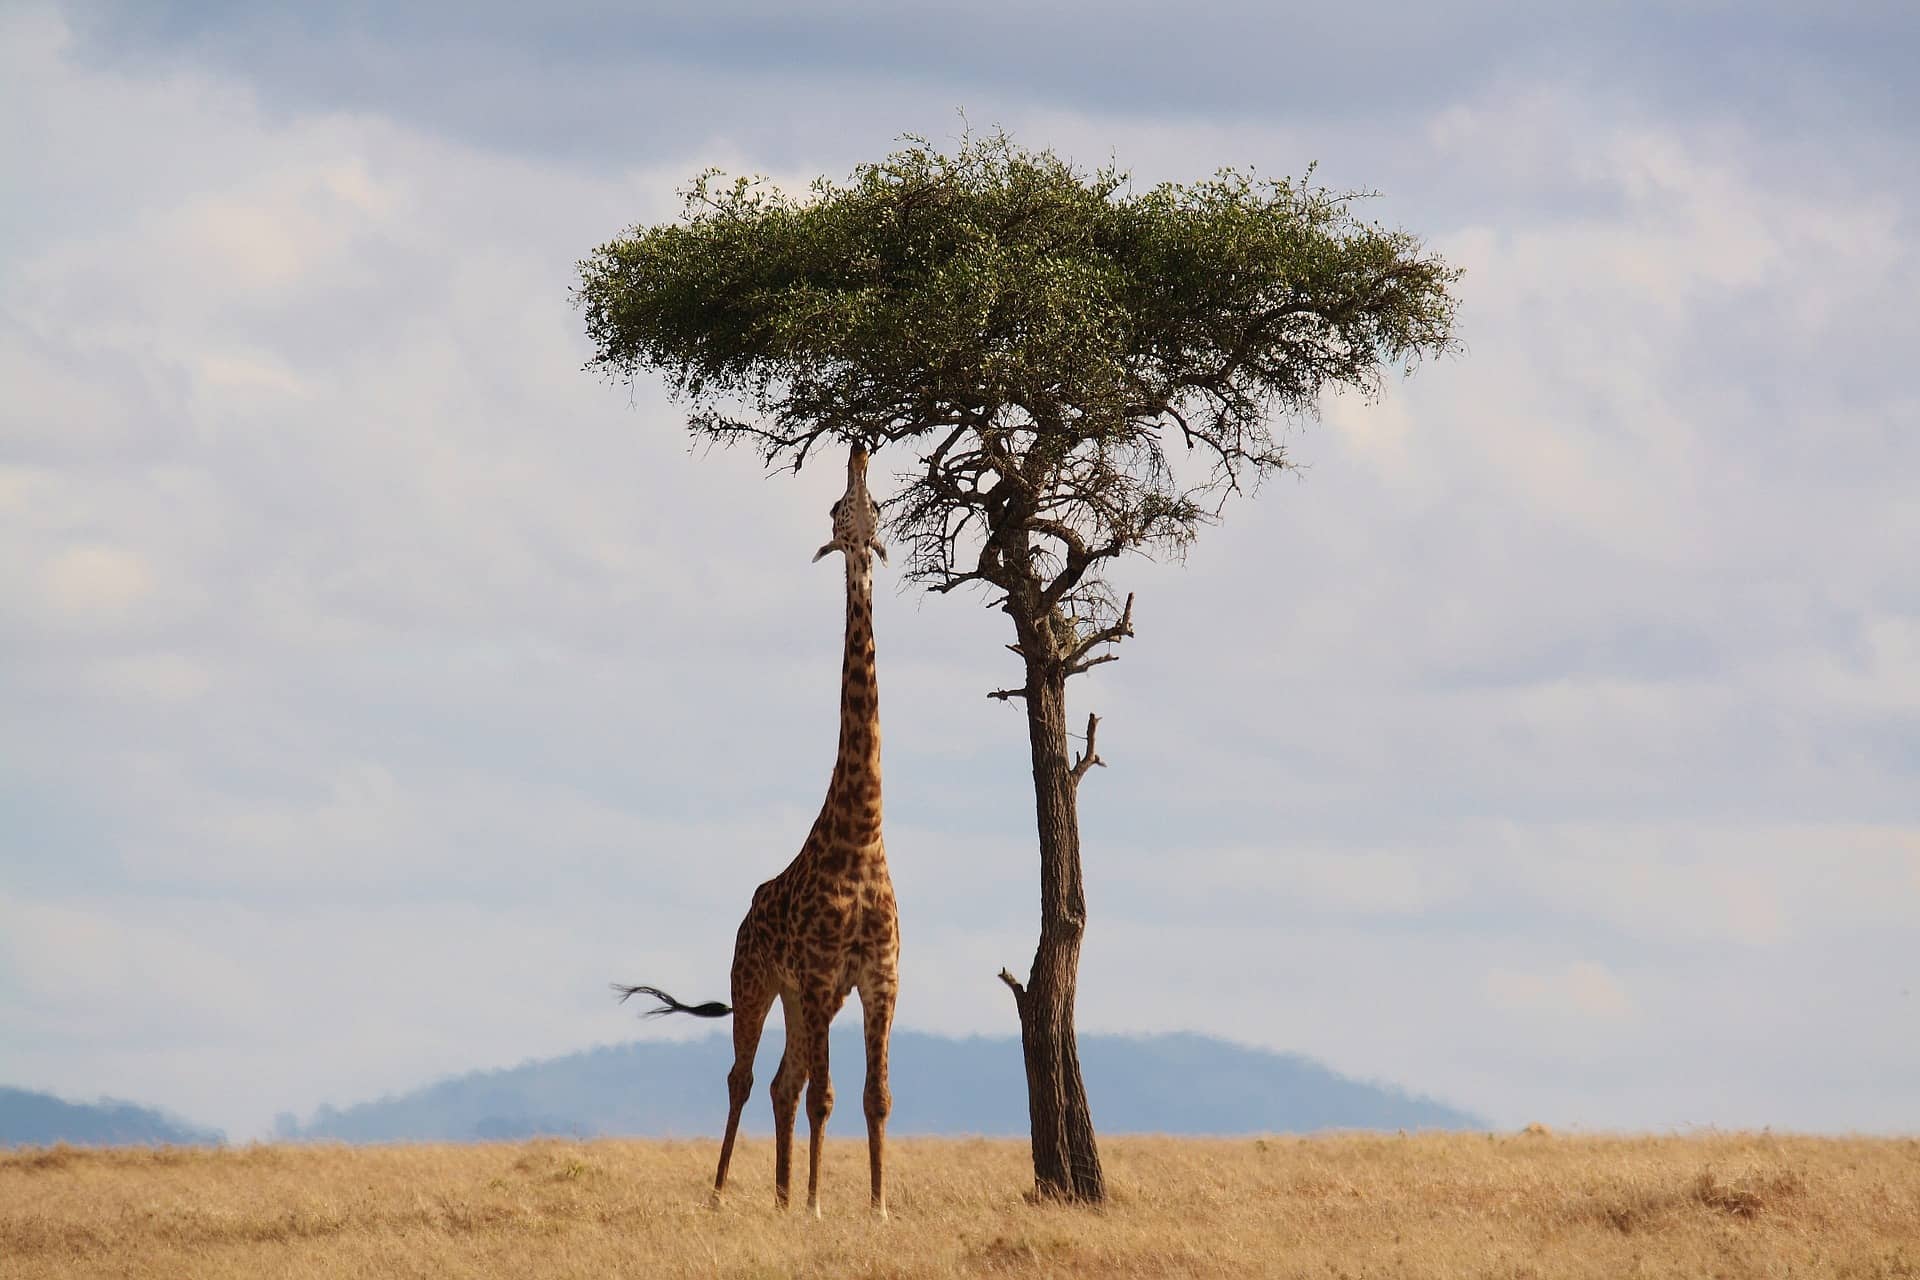 Giraffe is the tallest animal in the world. It has long legs and neck.  neck. Its long neck helps in 